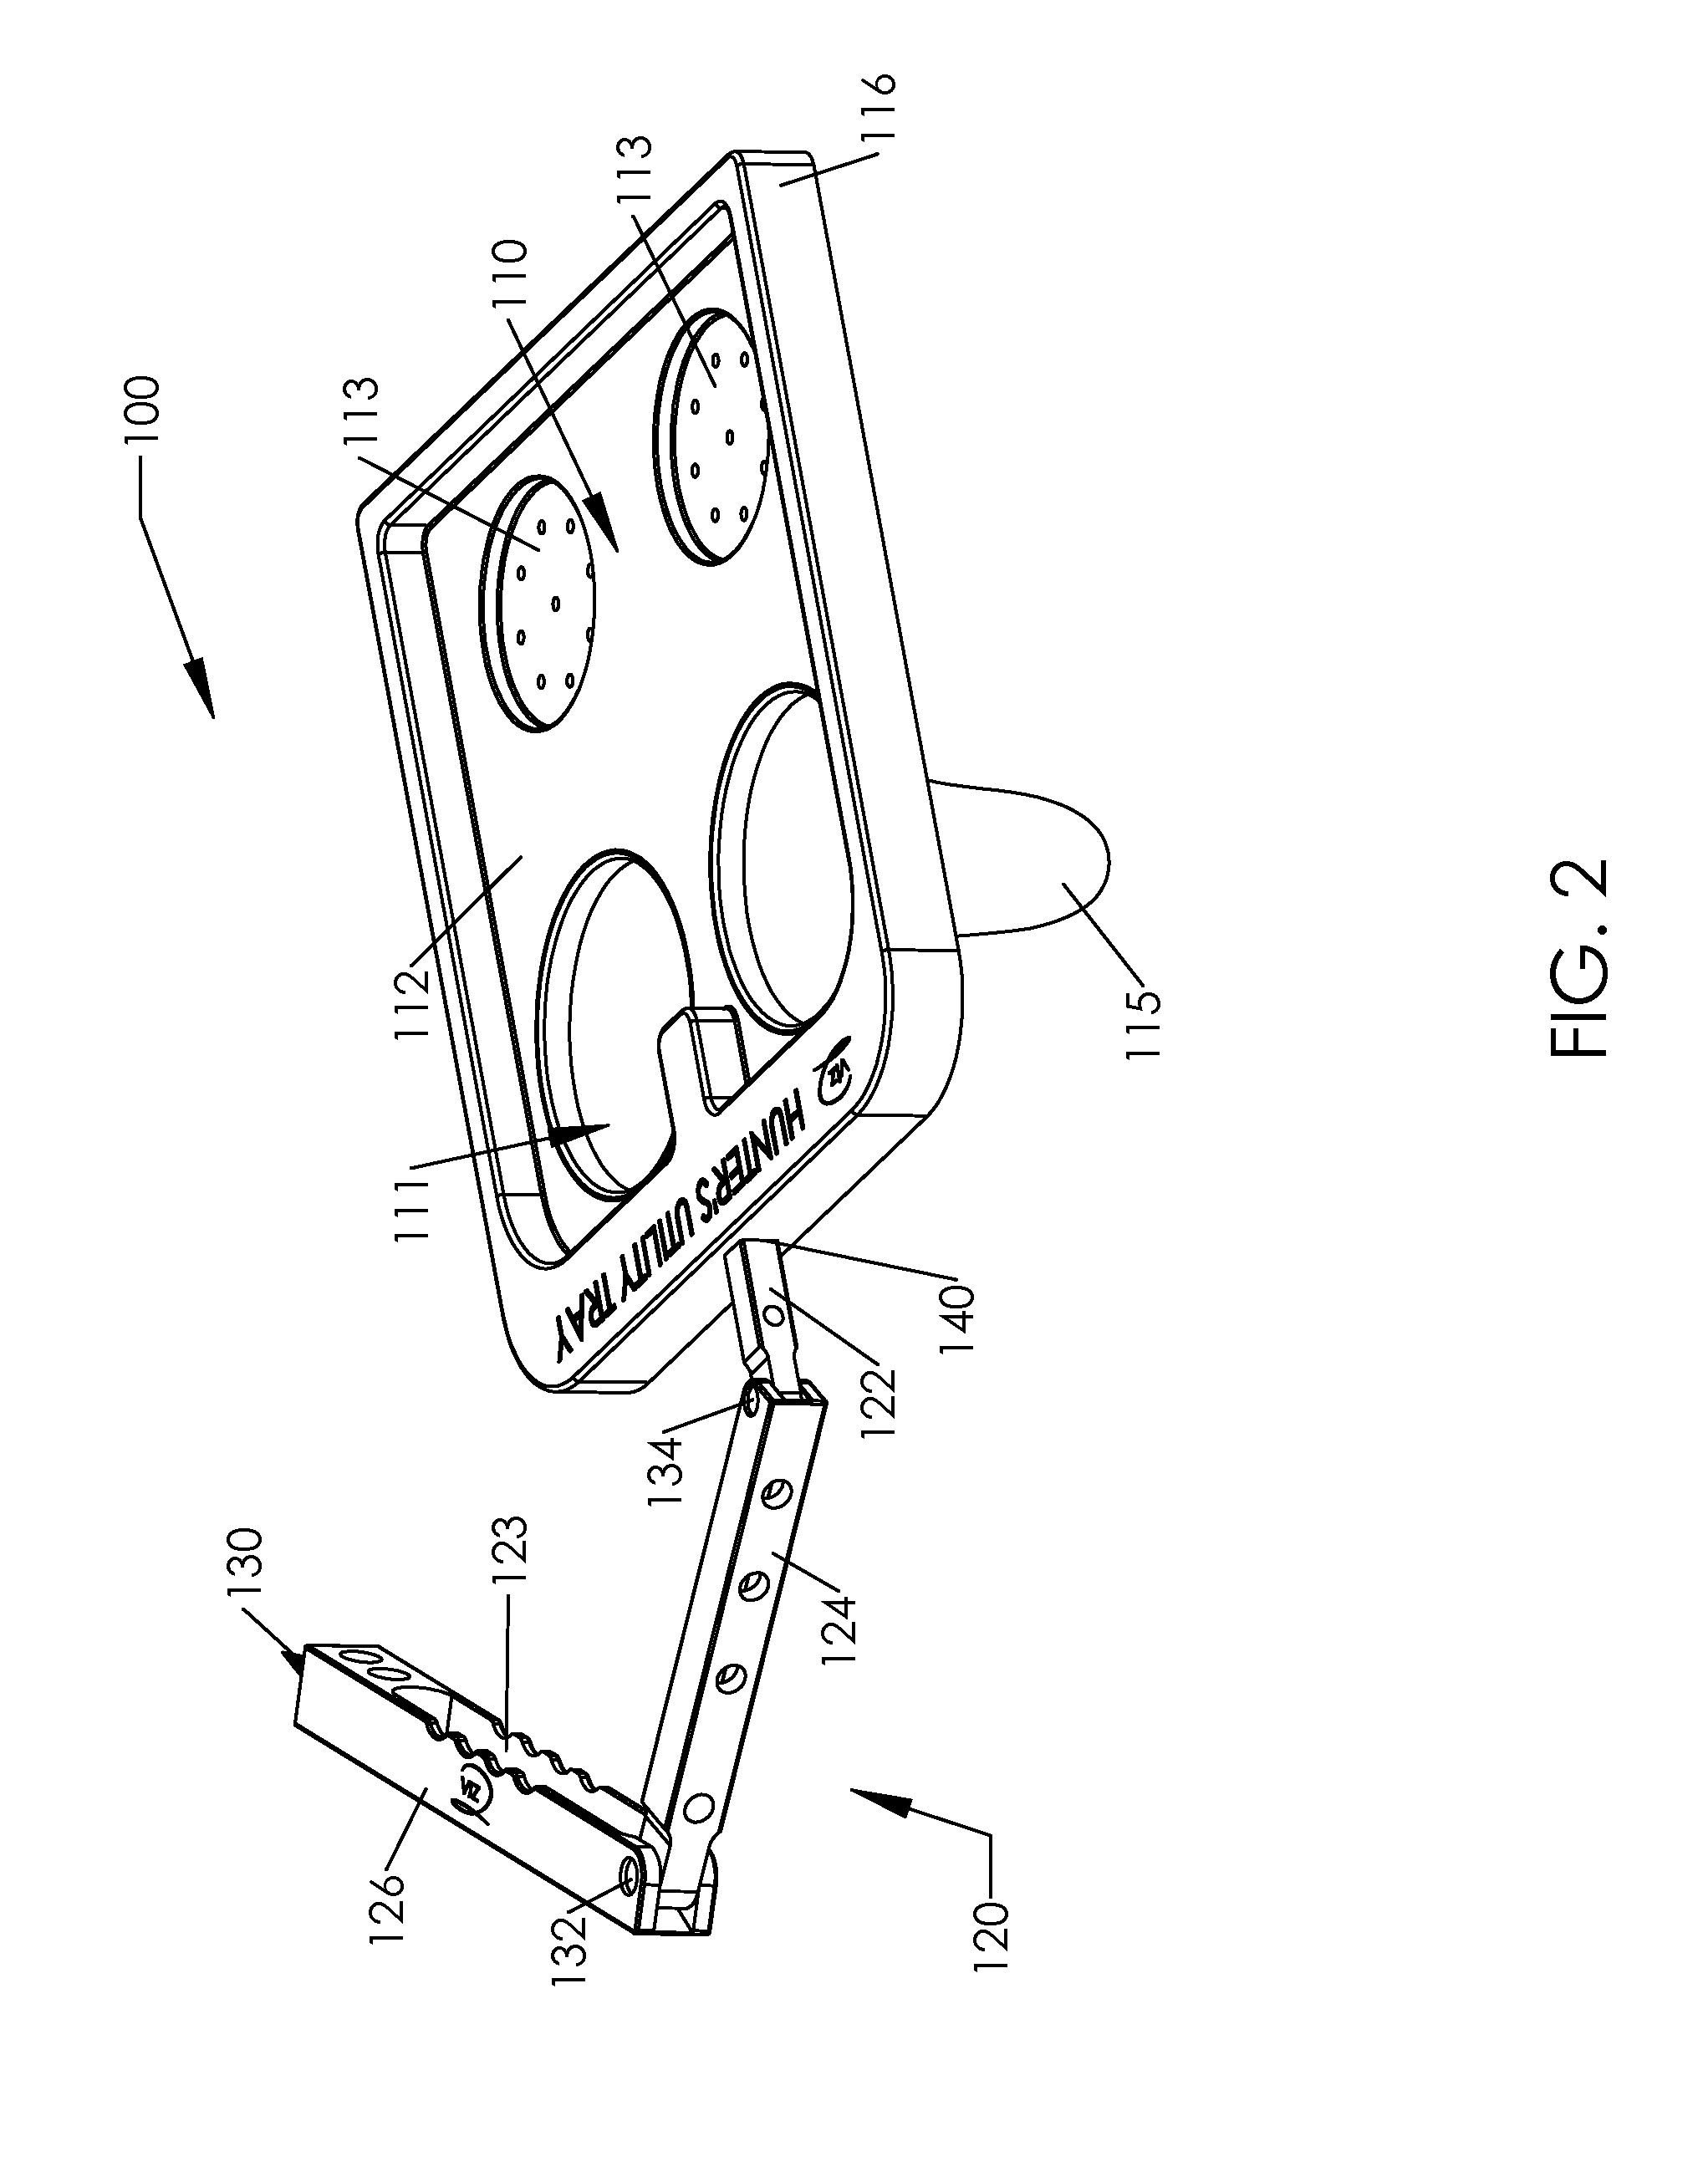 Hunting utility tray and folding arm assembly